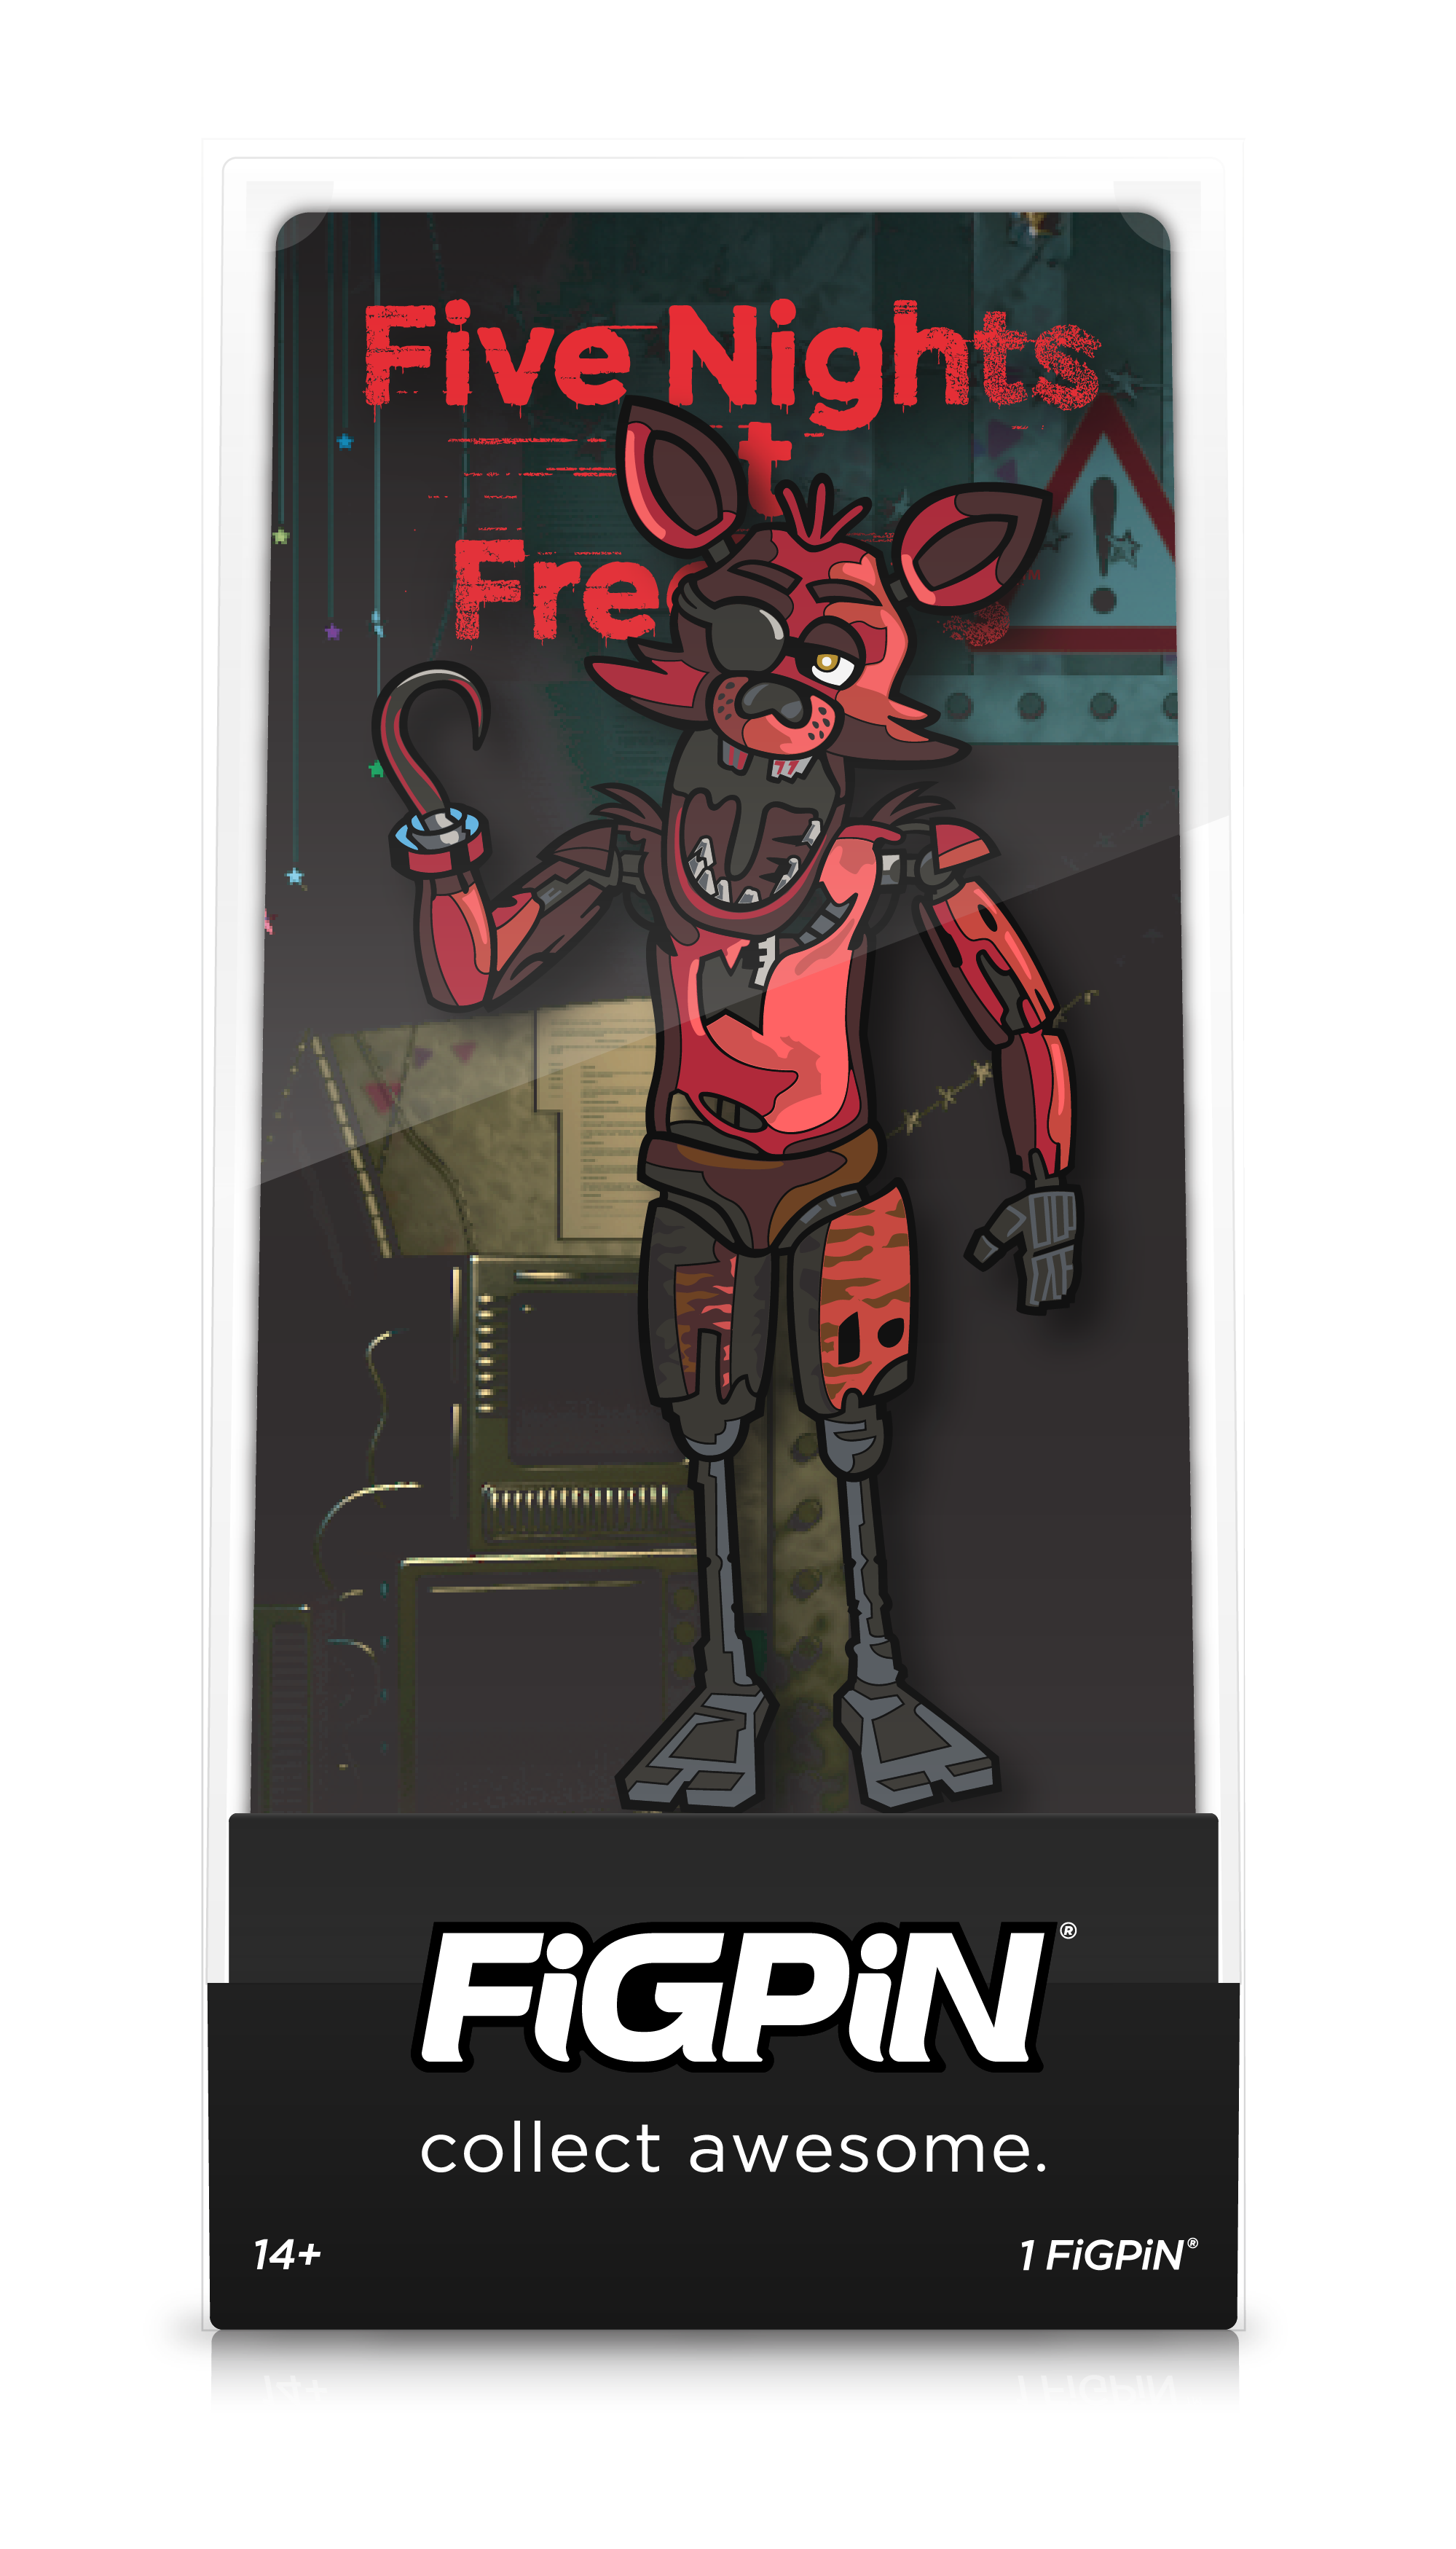 Front view of  Five Nights at Freddy's Foxy enamel pin inside FiGPiN Display case reading “collect awesome"